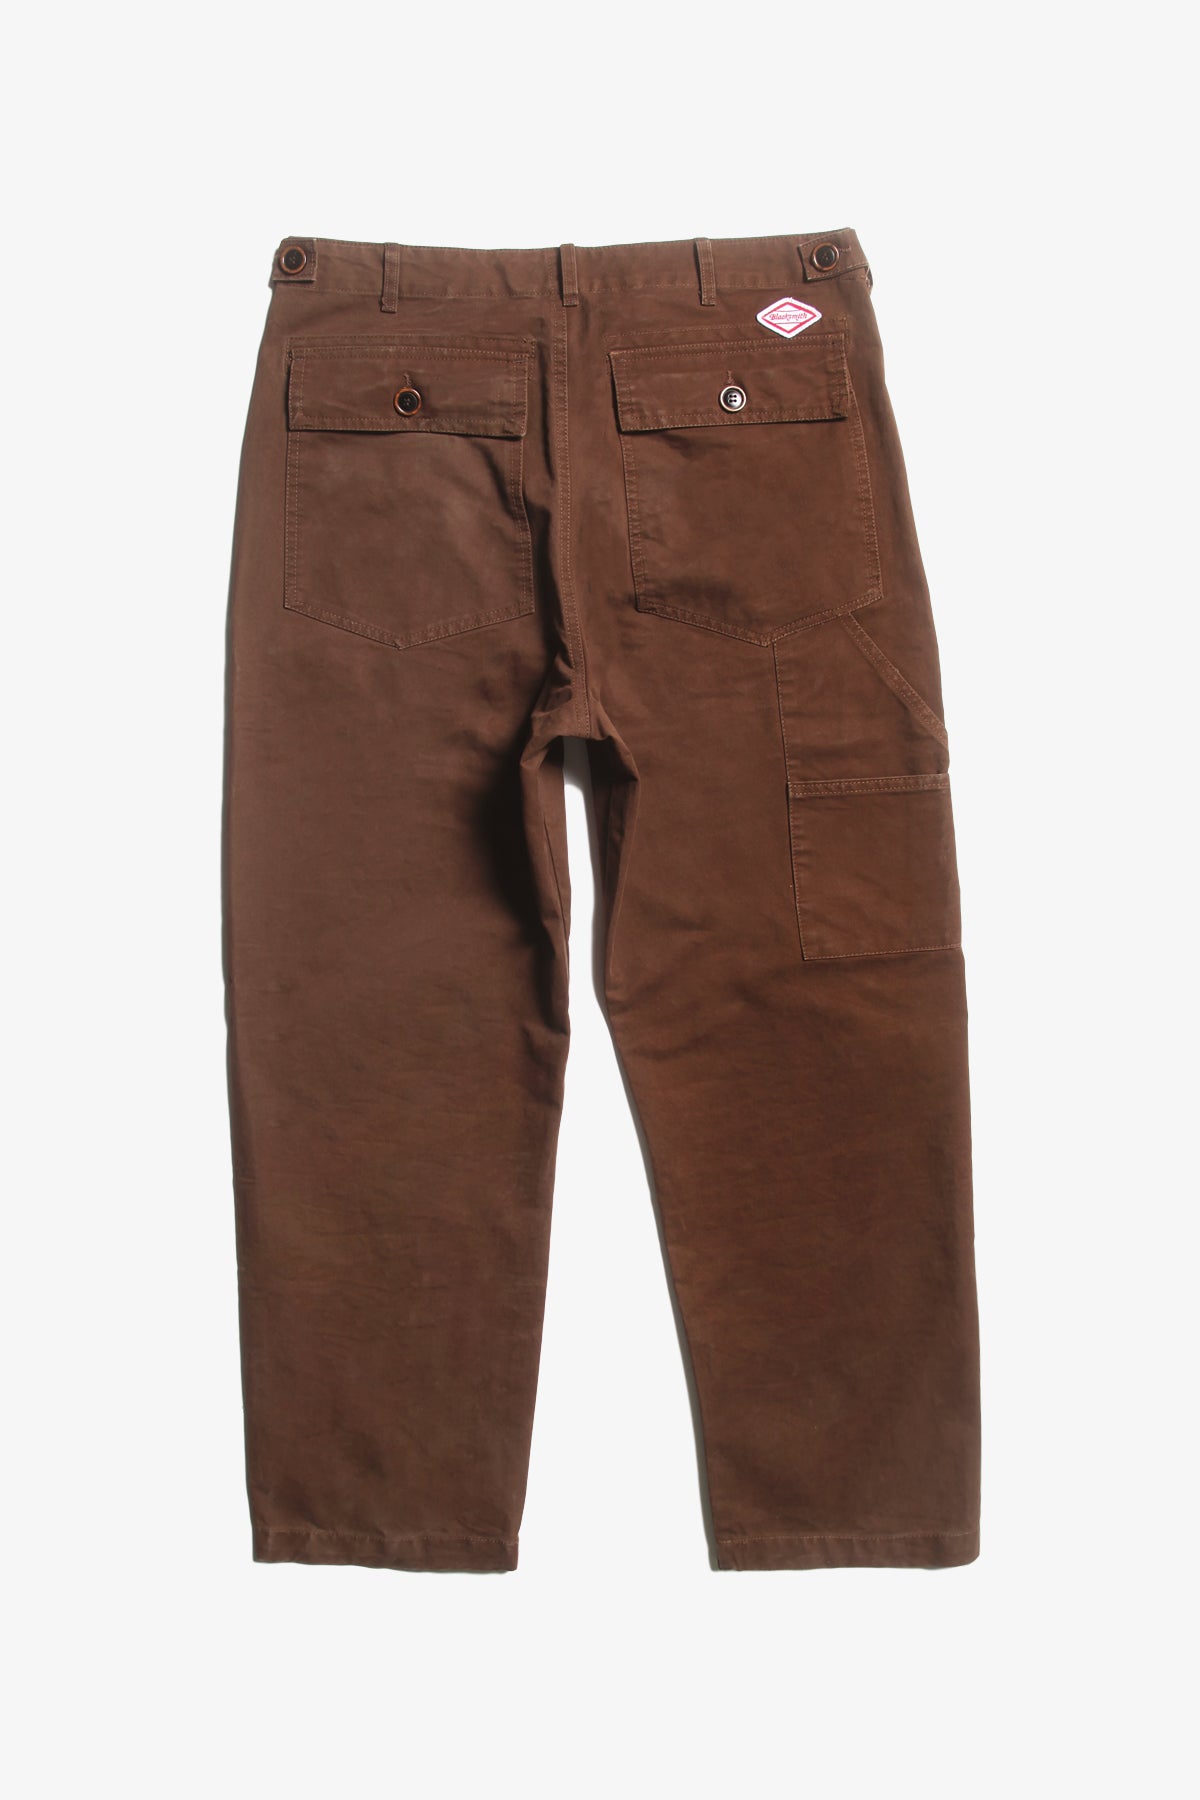 Blacksmith - Sowing Field Pants - Brown | Blacksmith Store